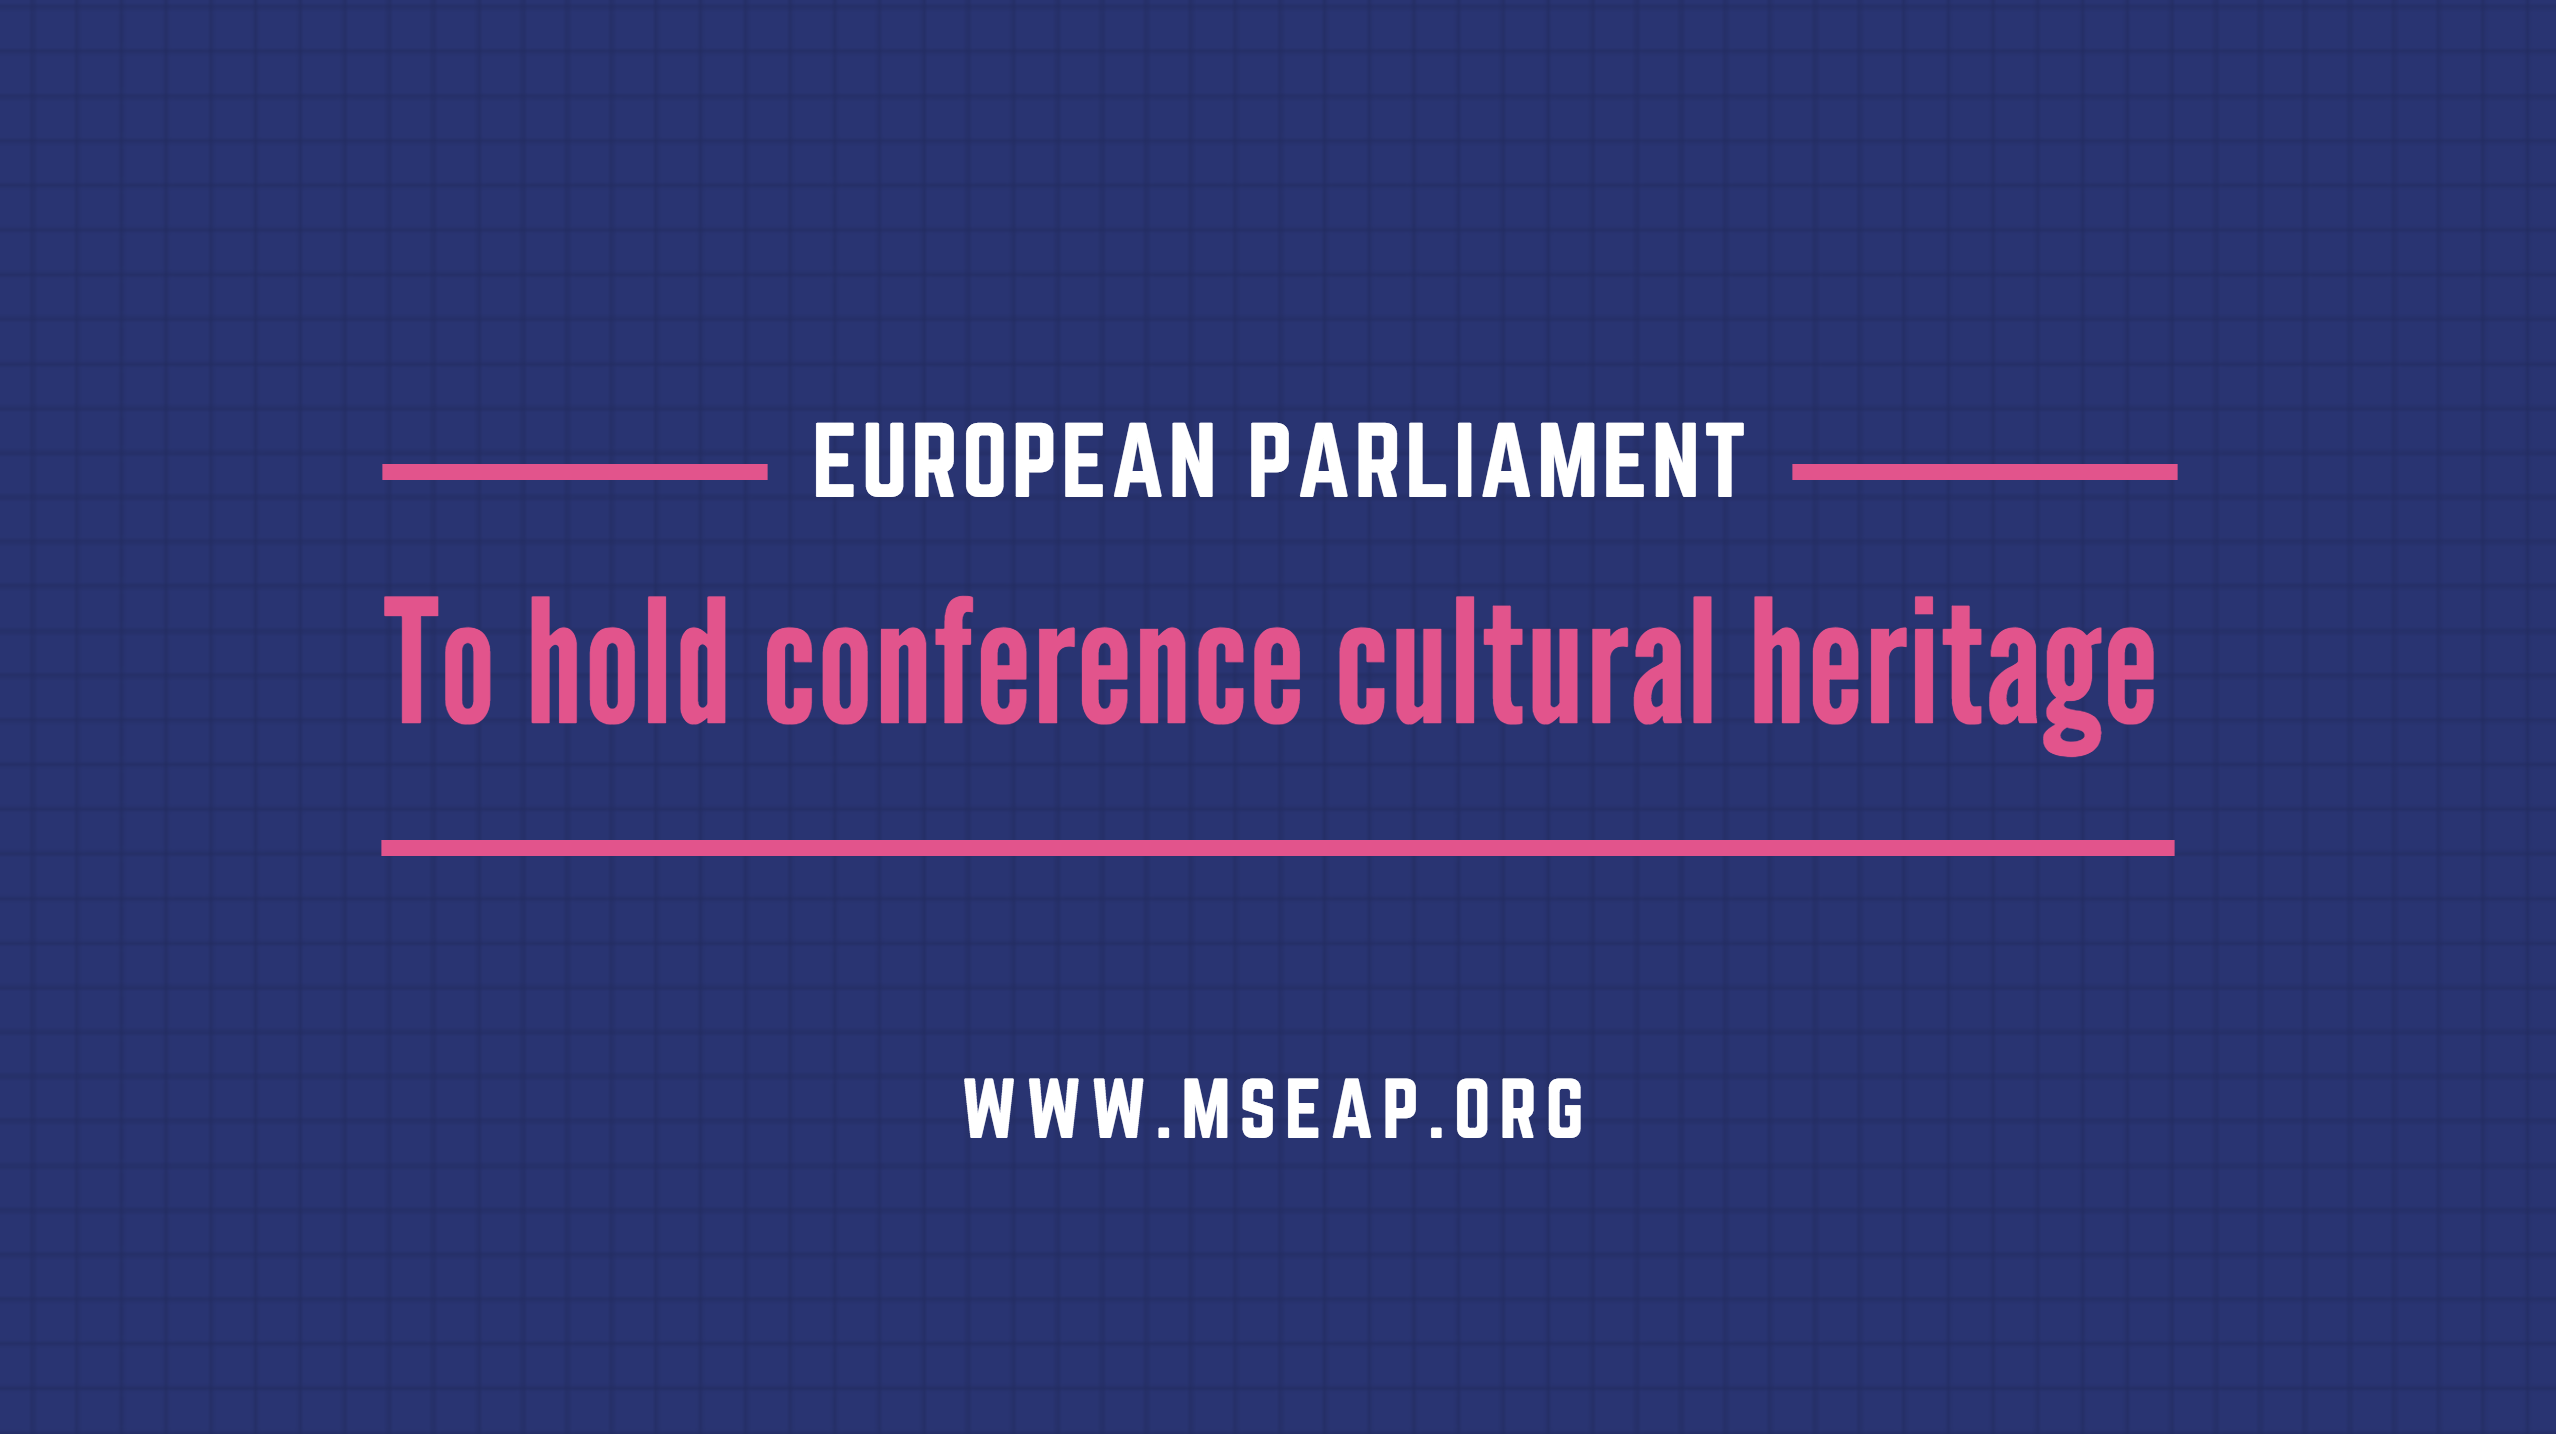 European Parliament’s conference to raise awareness of cultural heritage